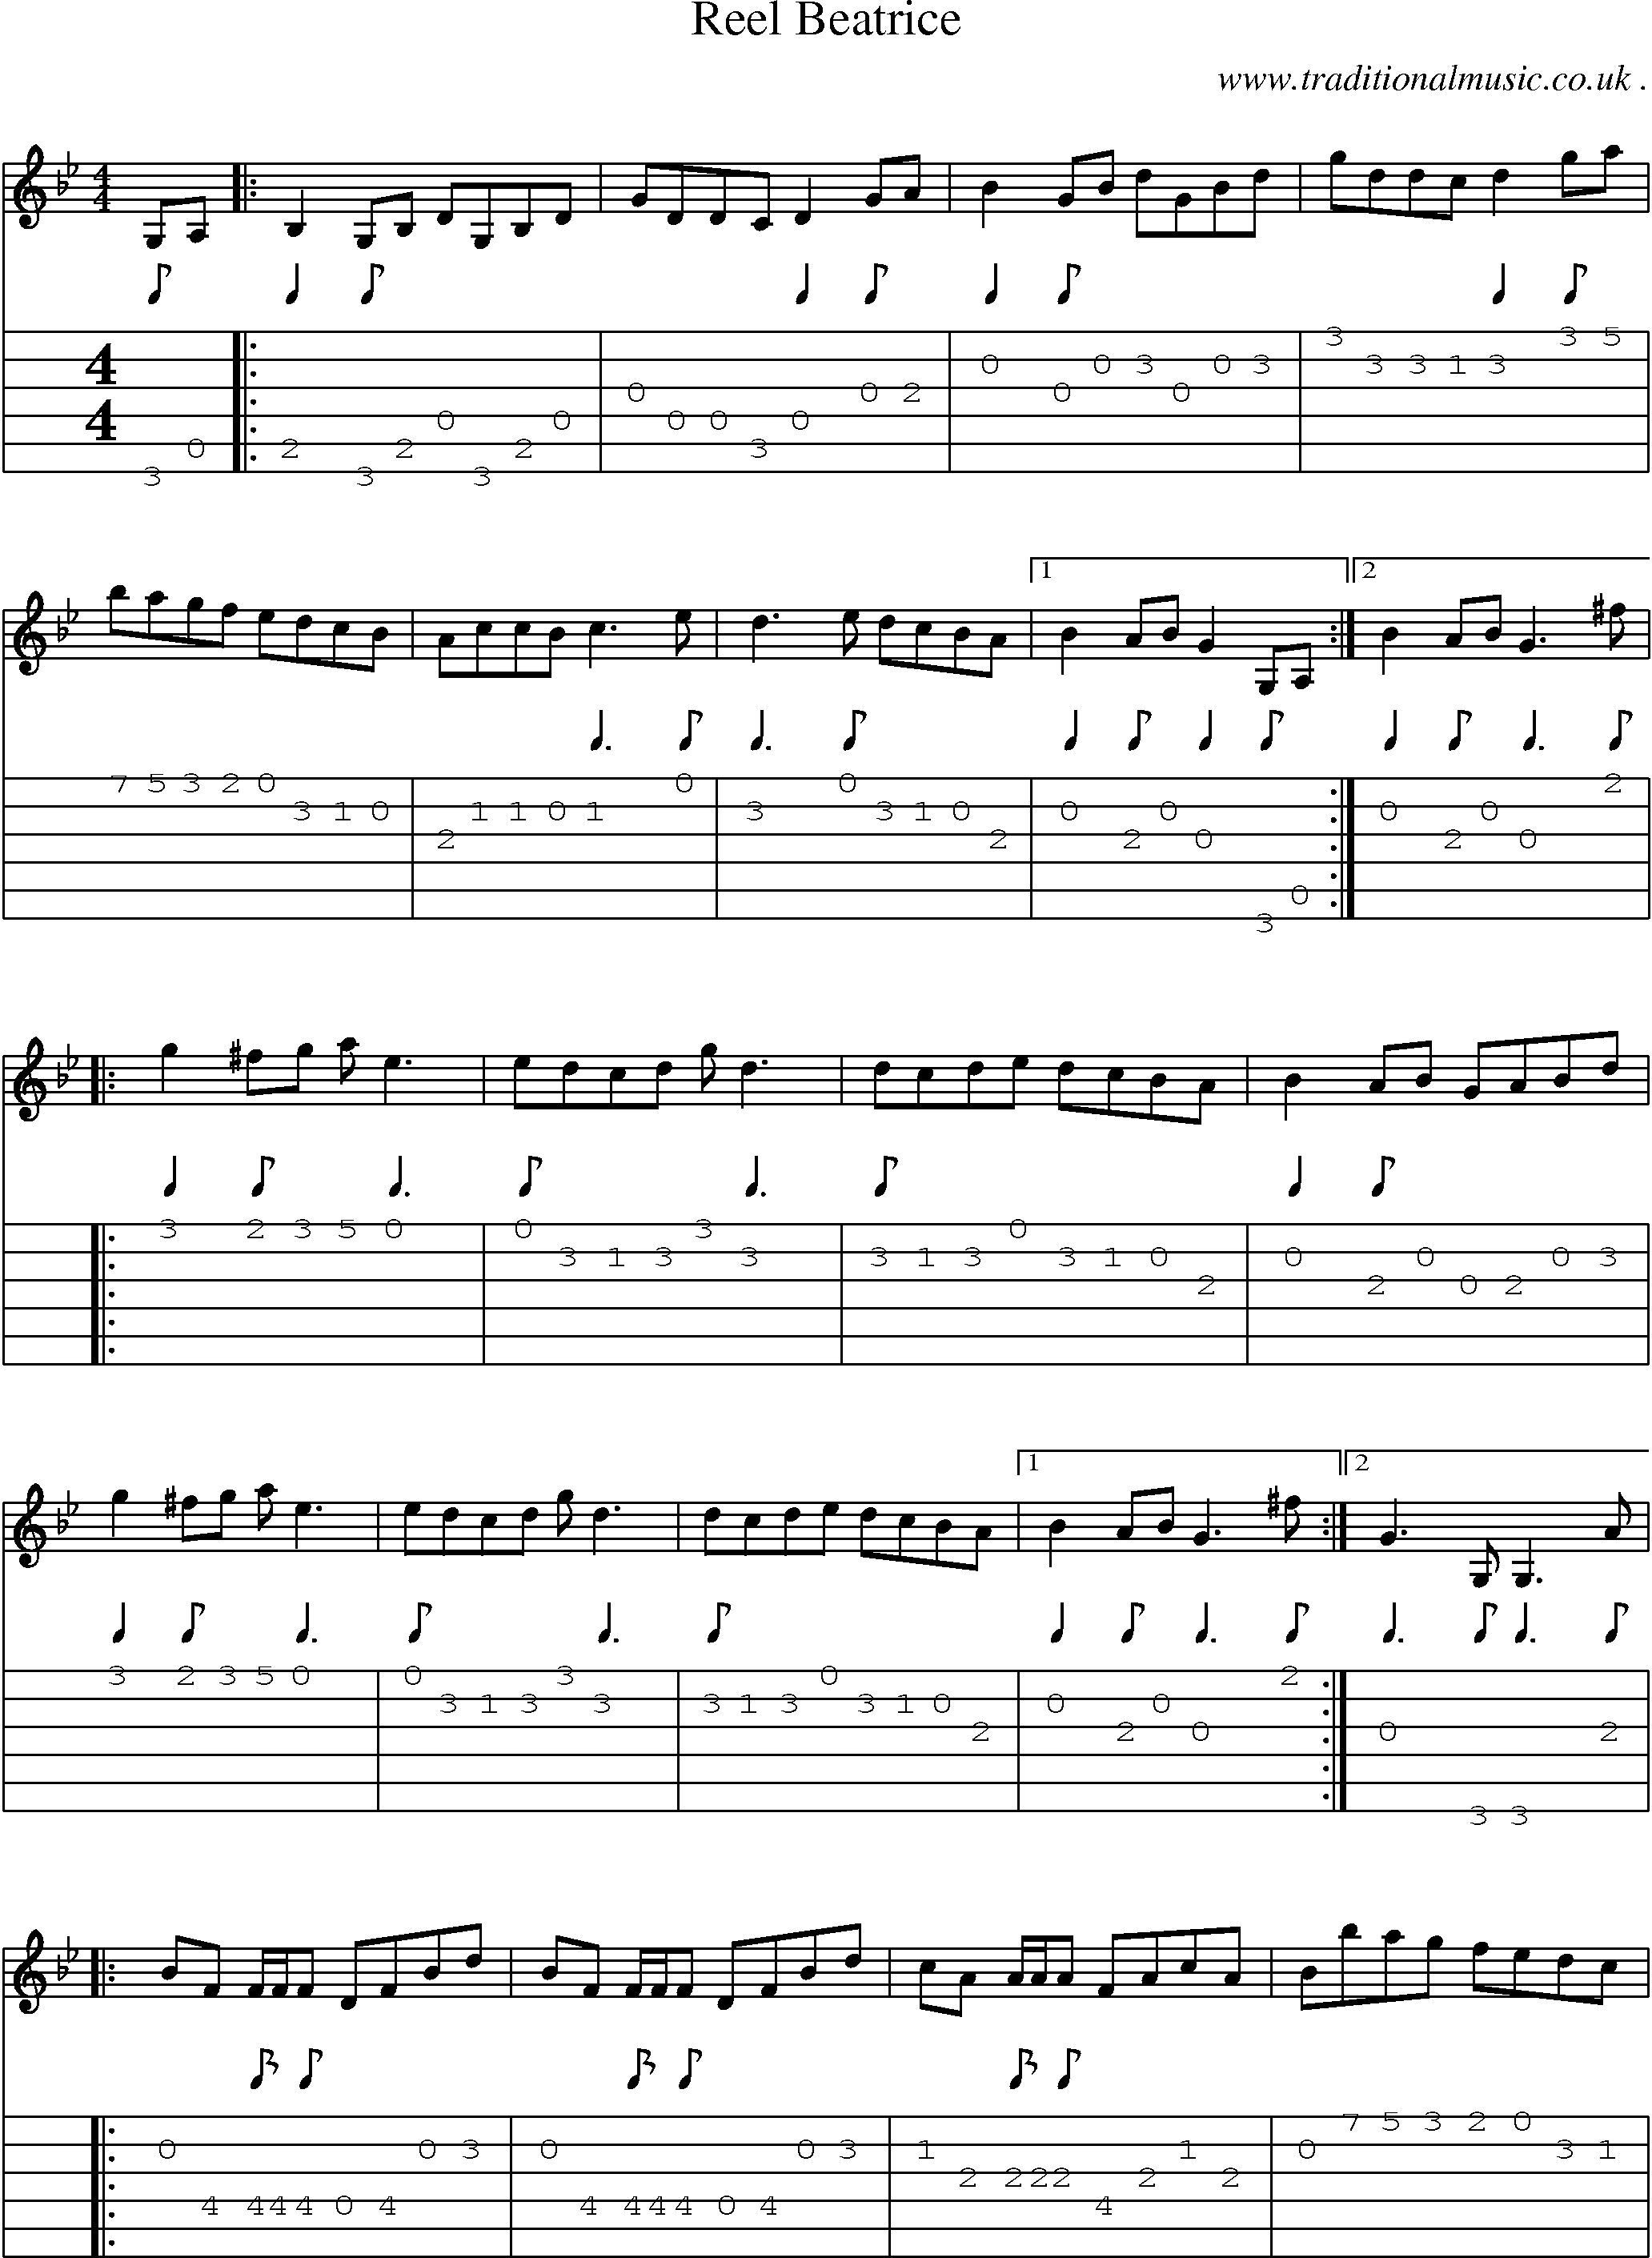 Sheet-Music and Guitar Tabs for Reel Beatrice